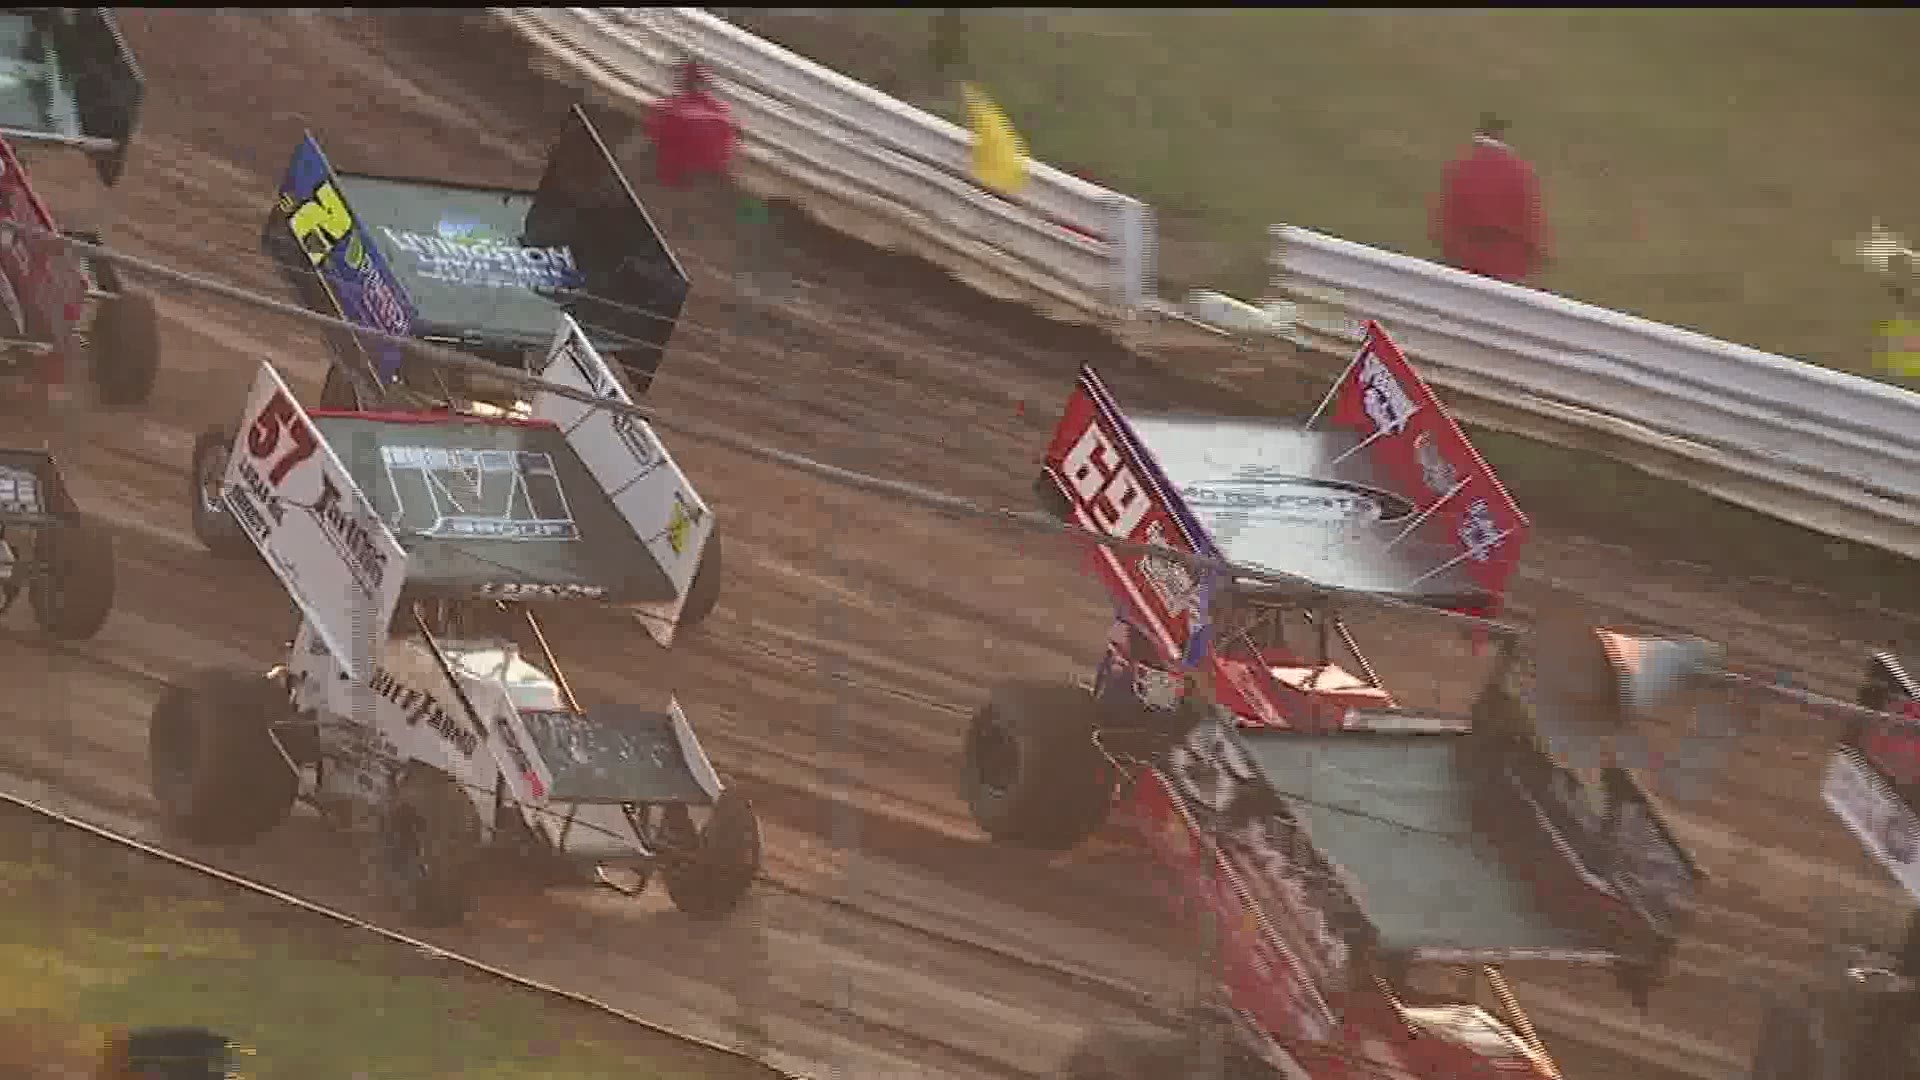 Danny Dietrich wins two of the first three races